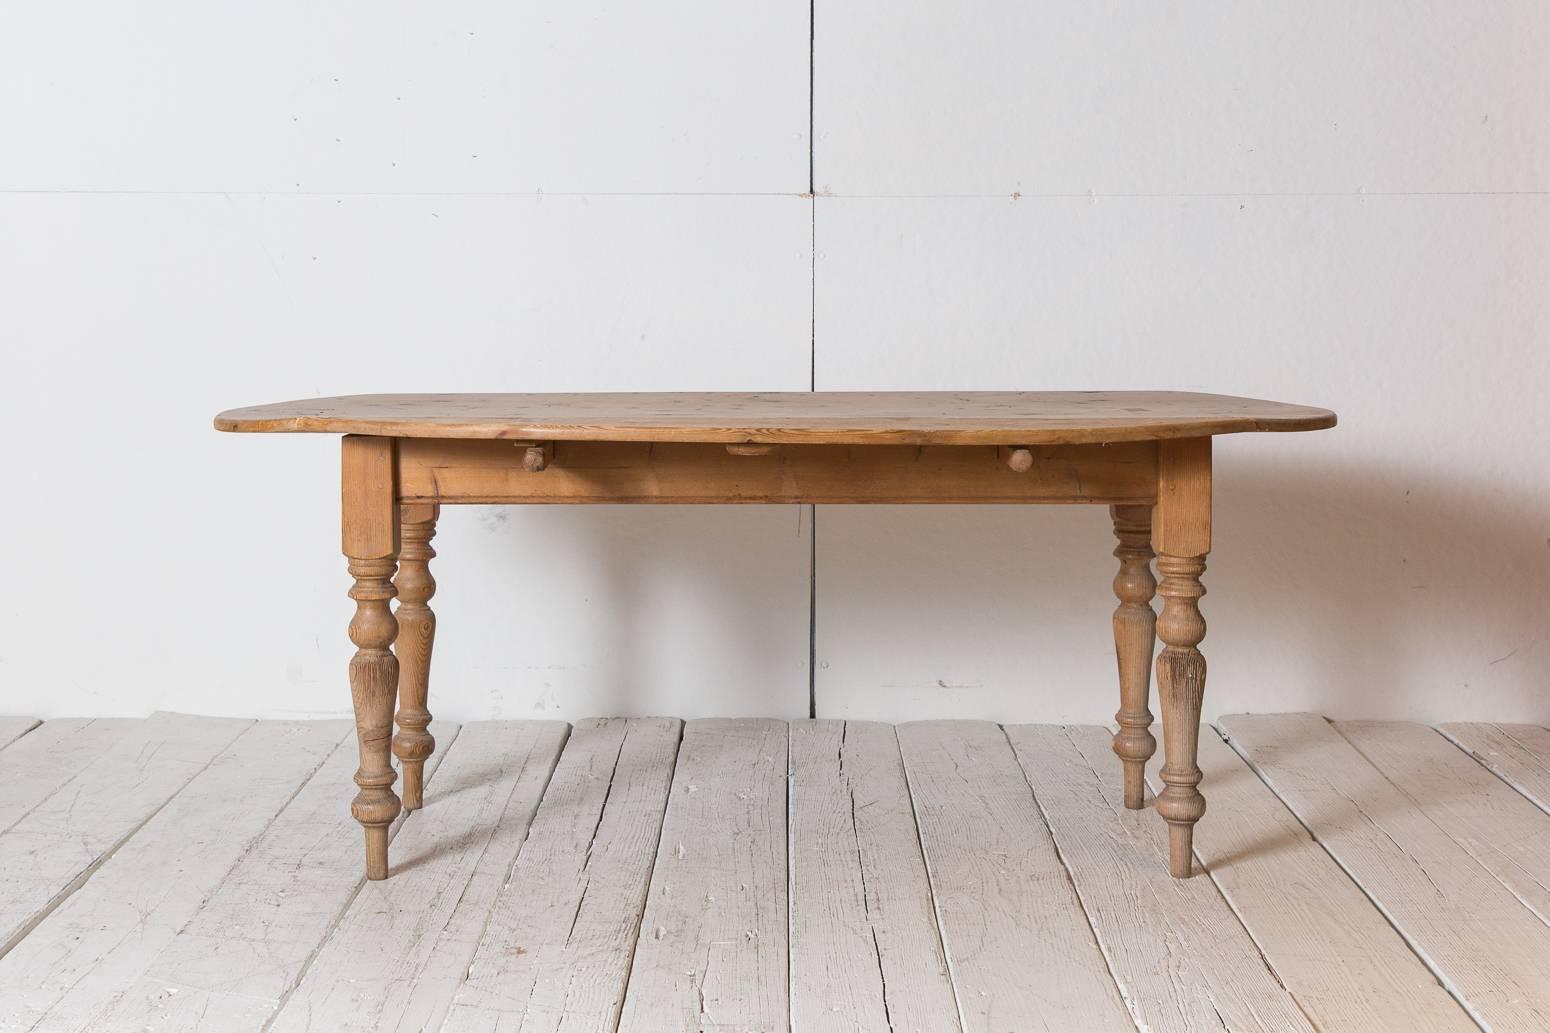 French pine drop-leaf table with spindle legs, table extends to be an oval dining table. Table measures 44